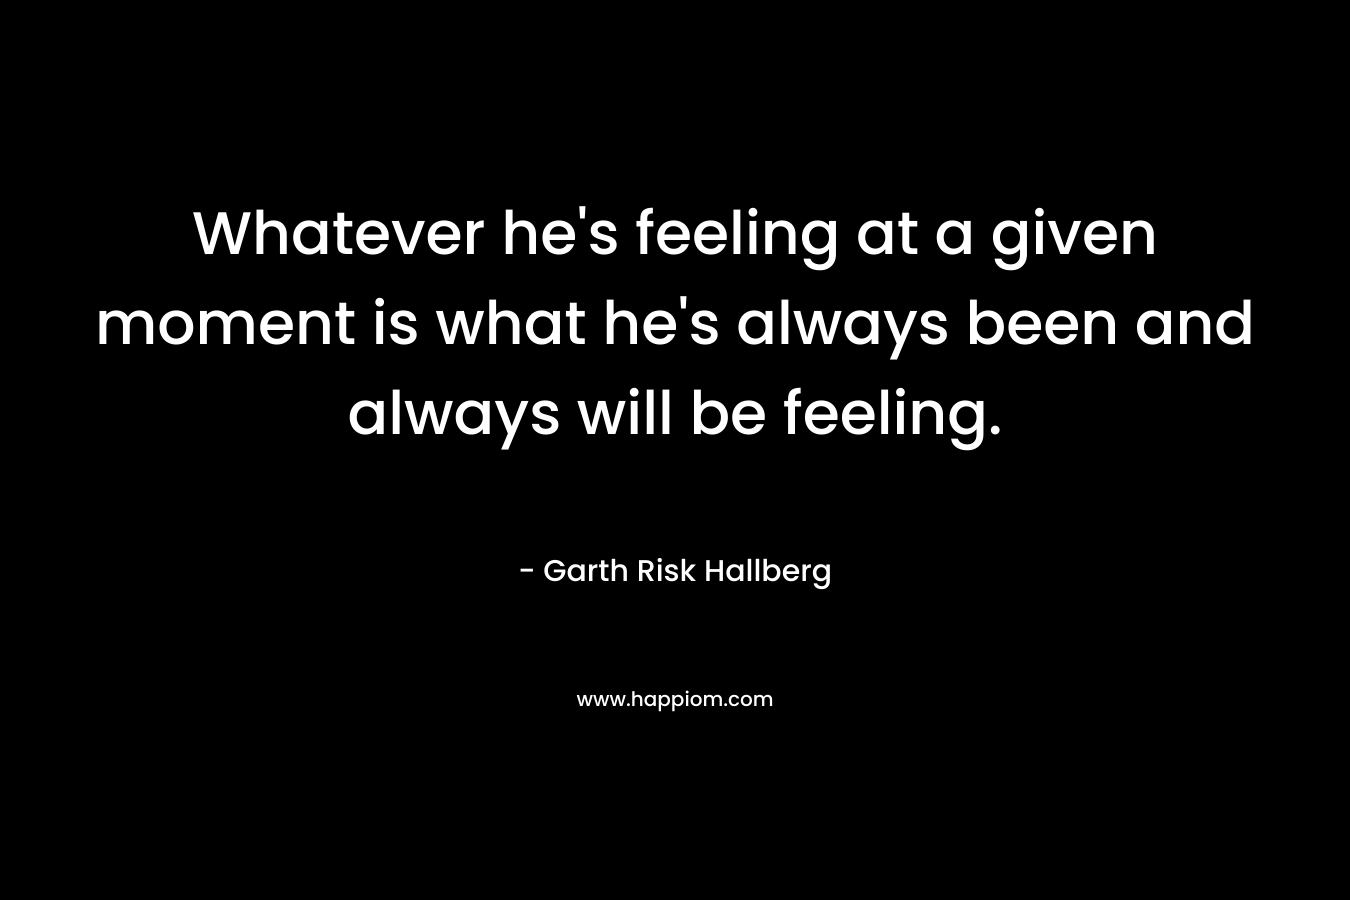 Whatever he’s feeling at a given moment is what he’s always been and always will be feeling. – Garth Risk Hallberg